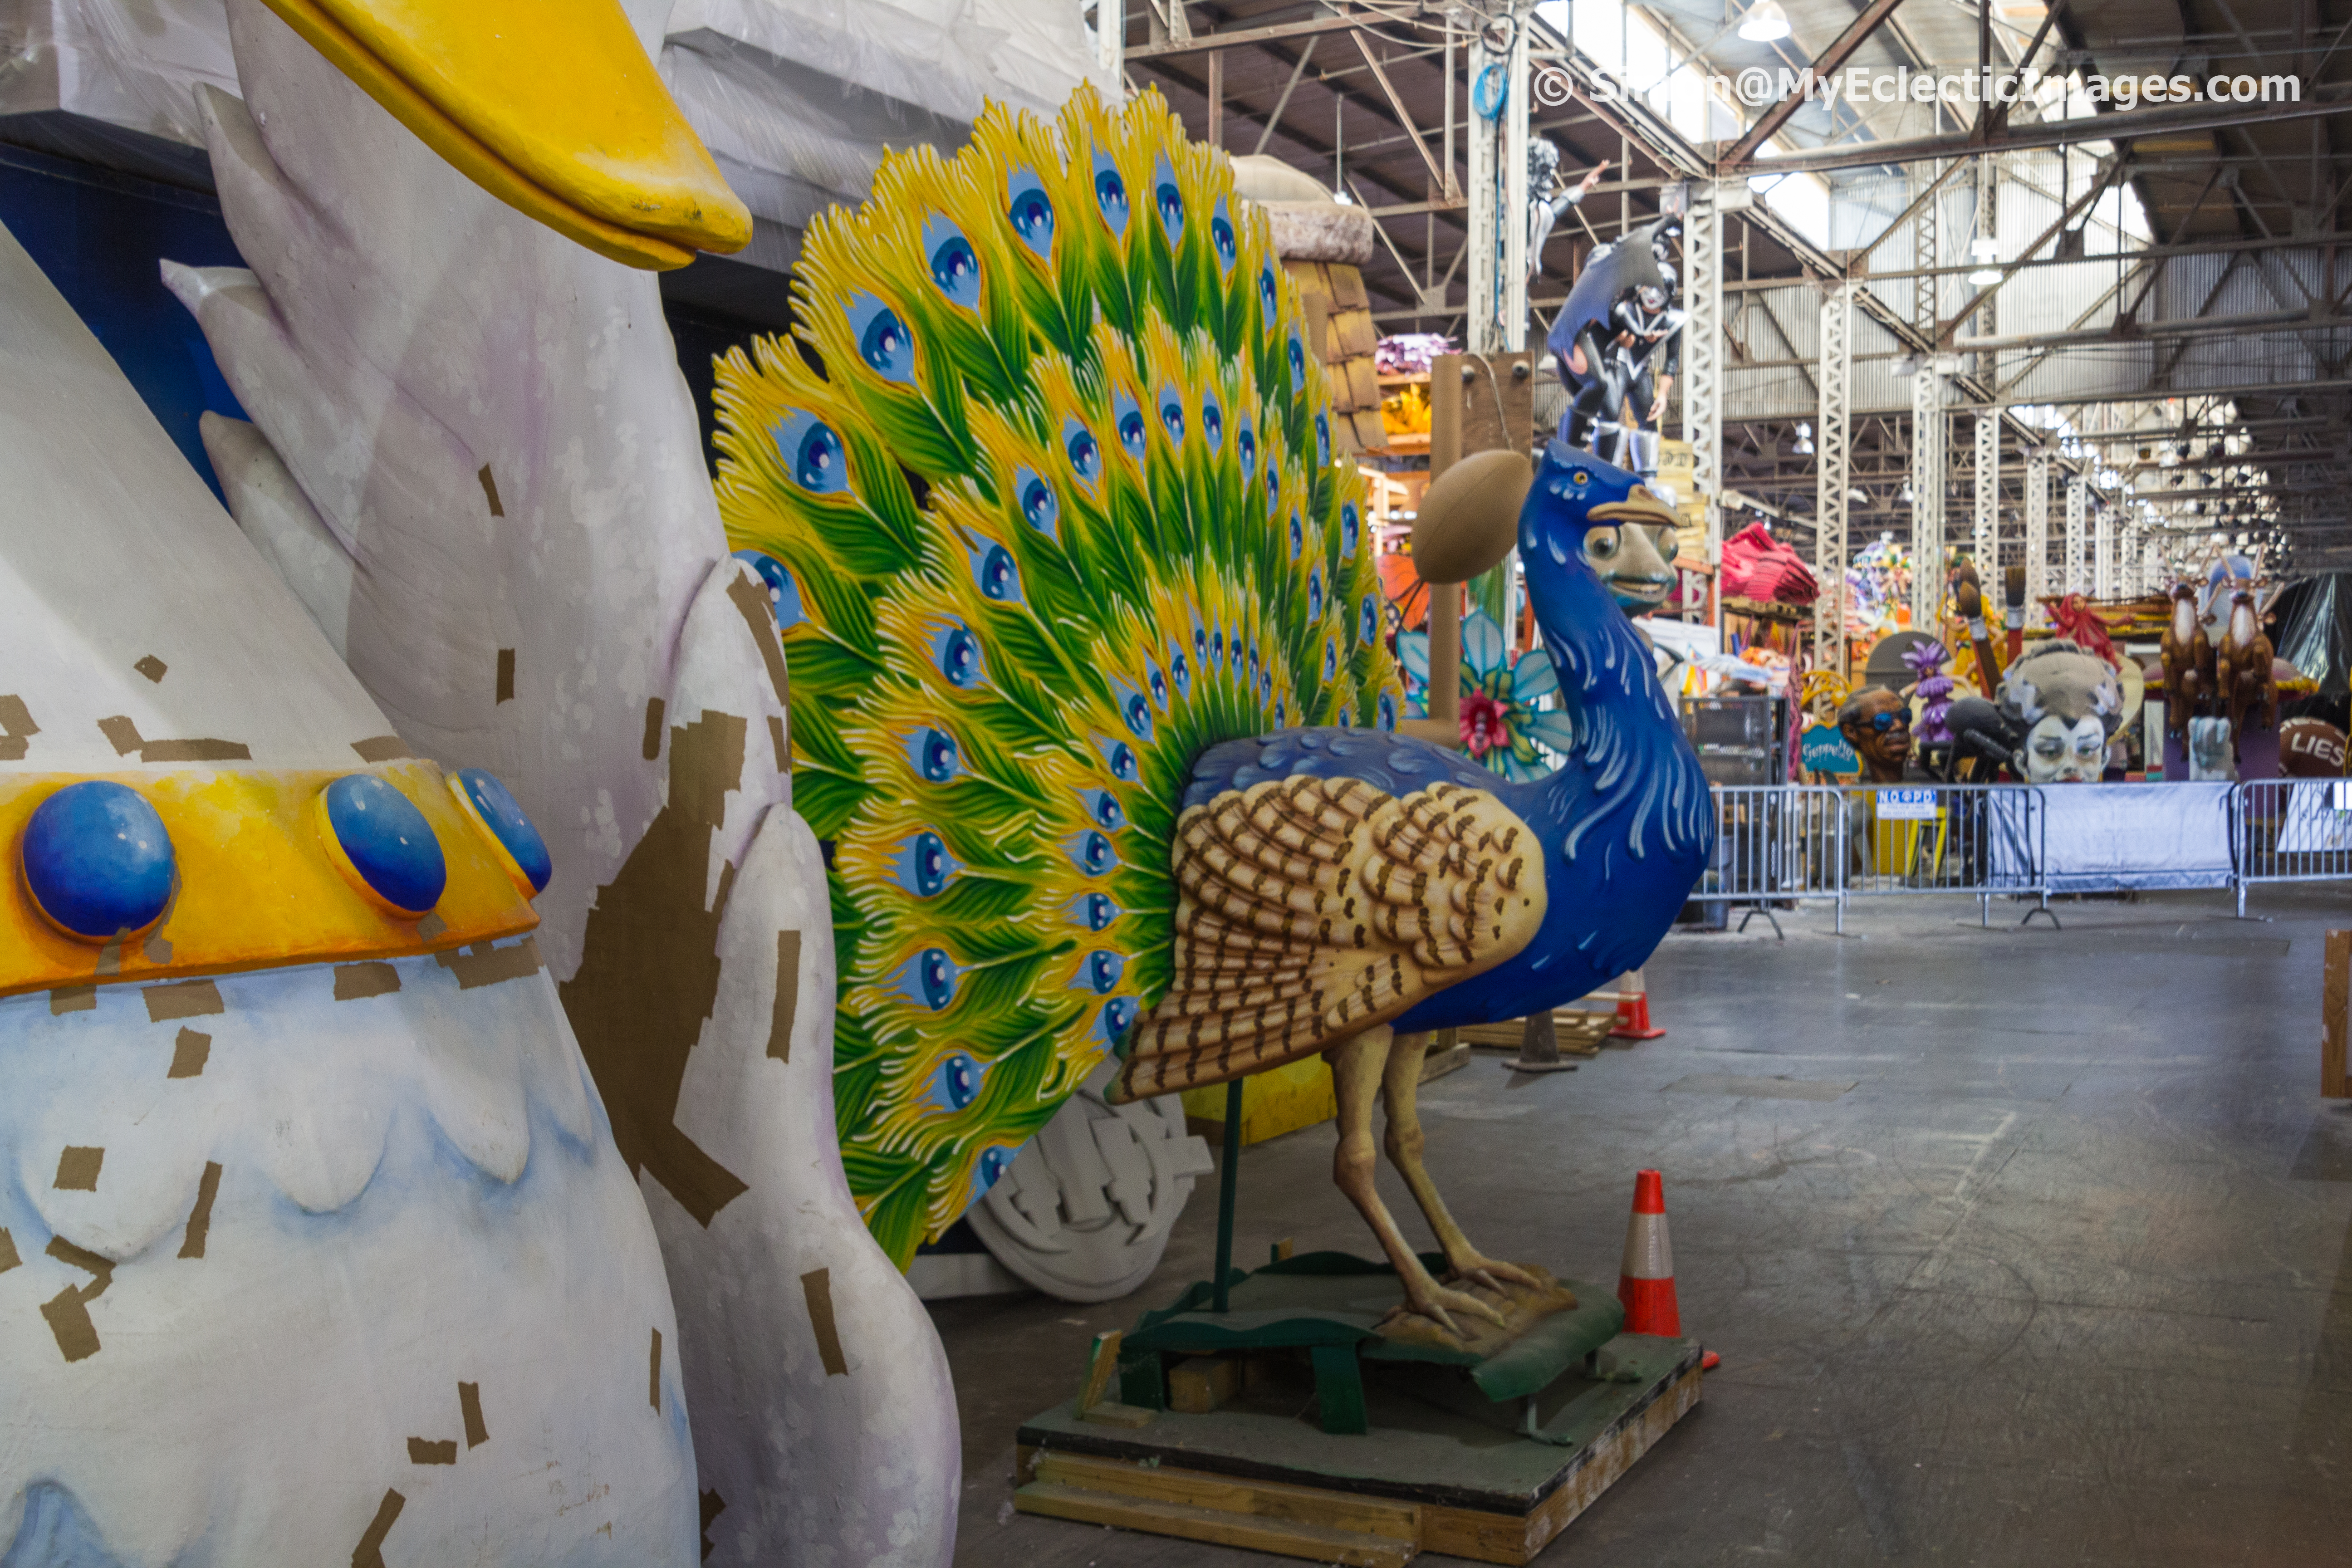 A peacock and other figures created at Mardi Gras World